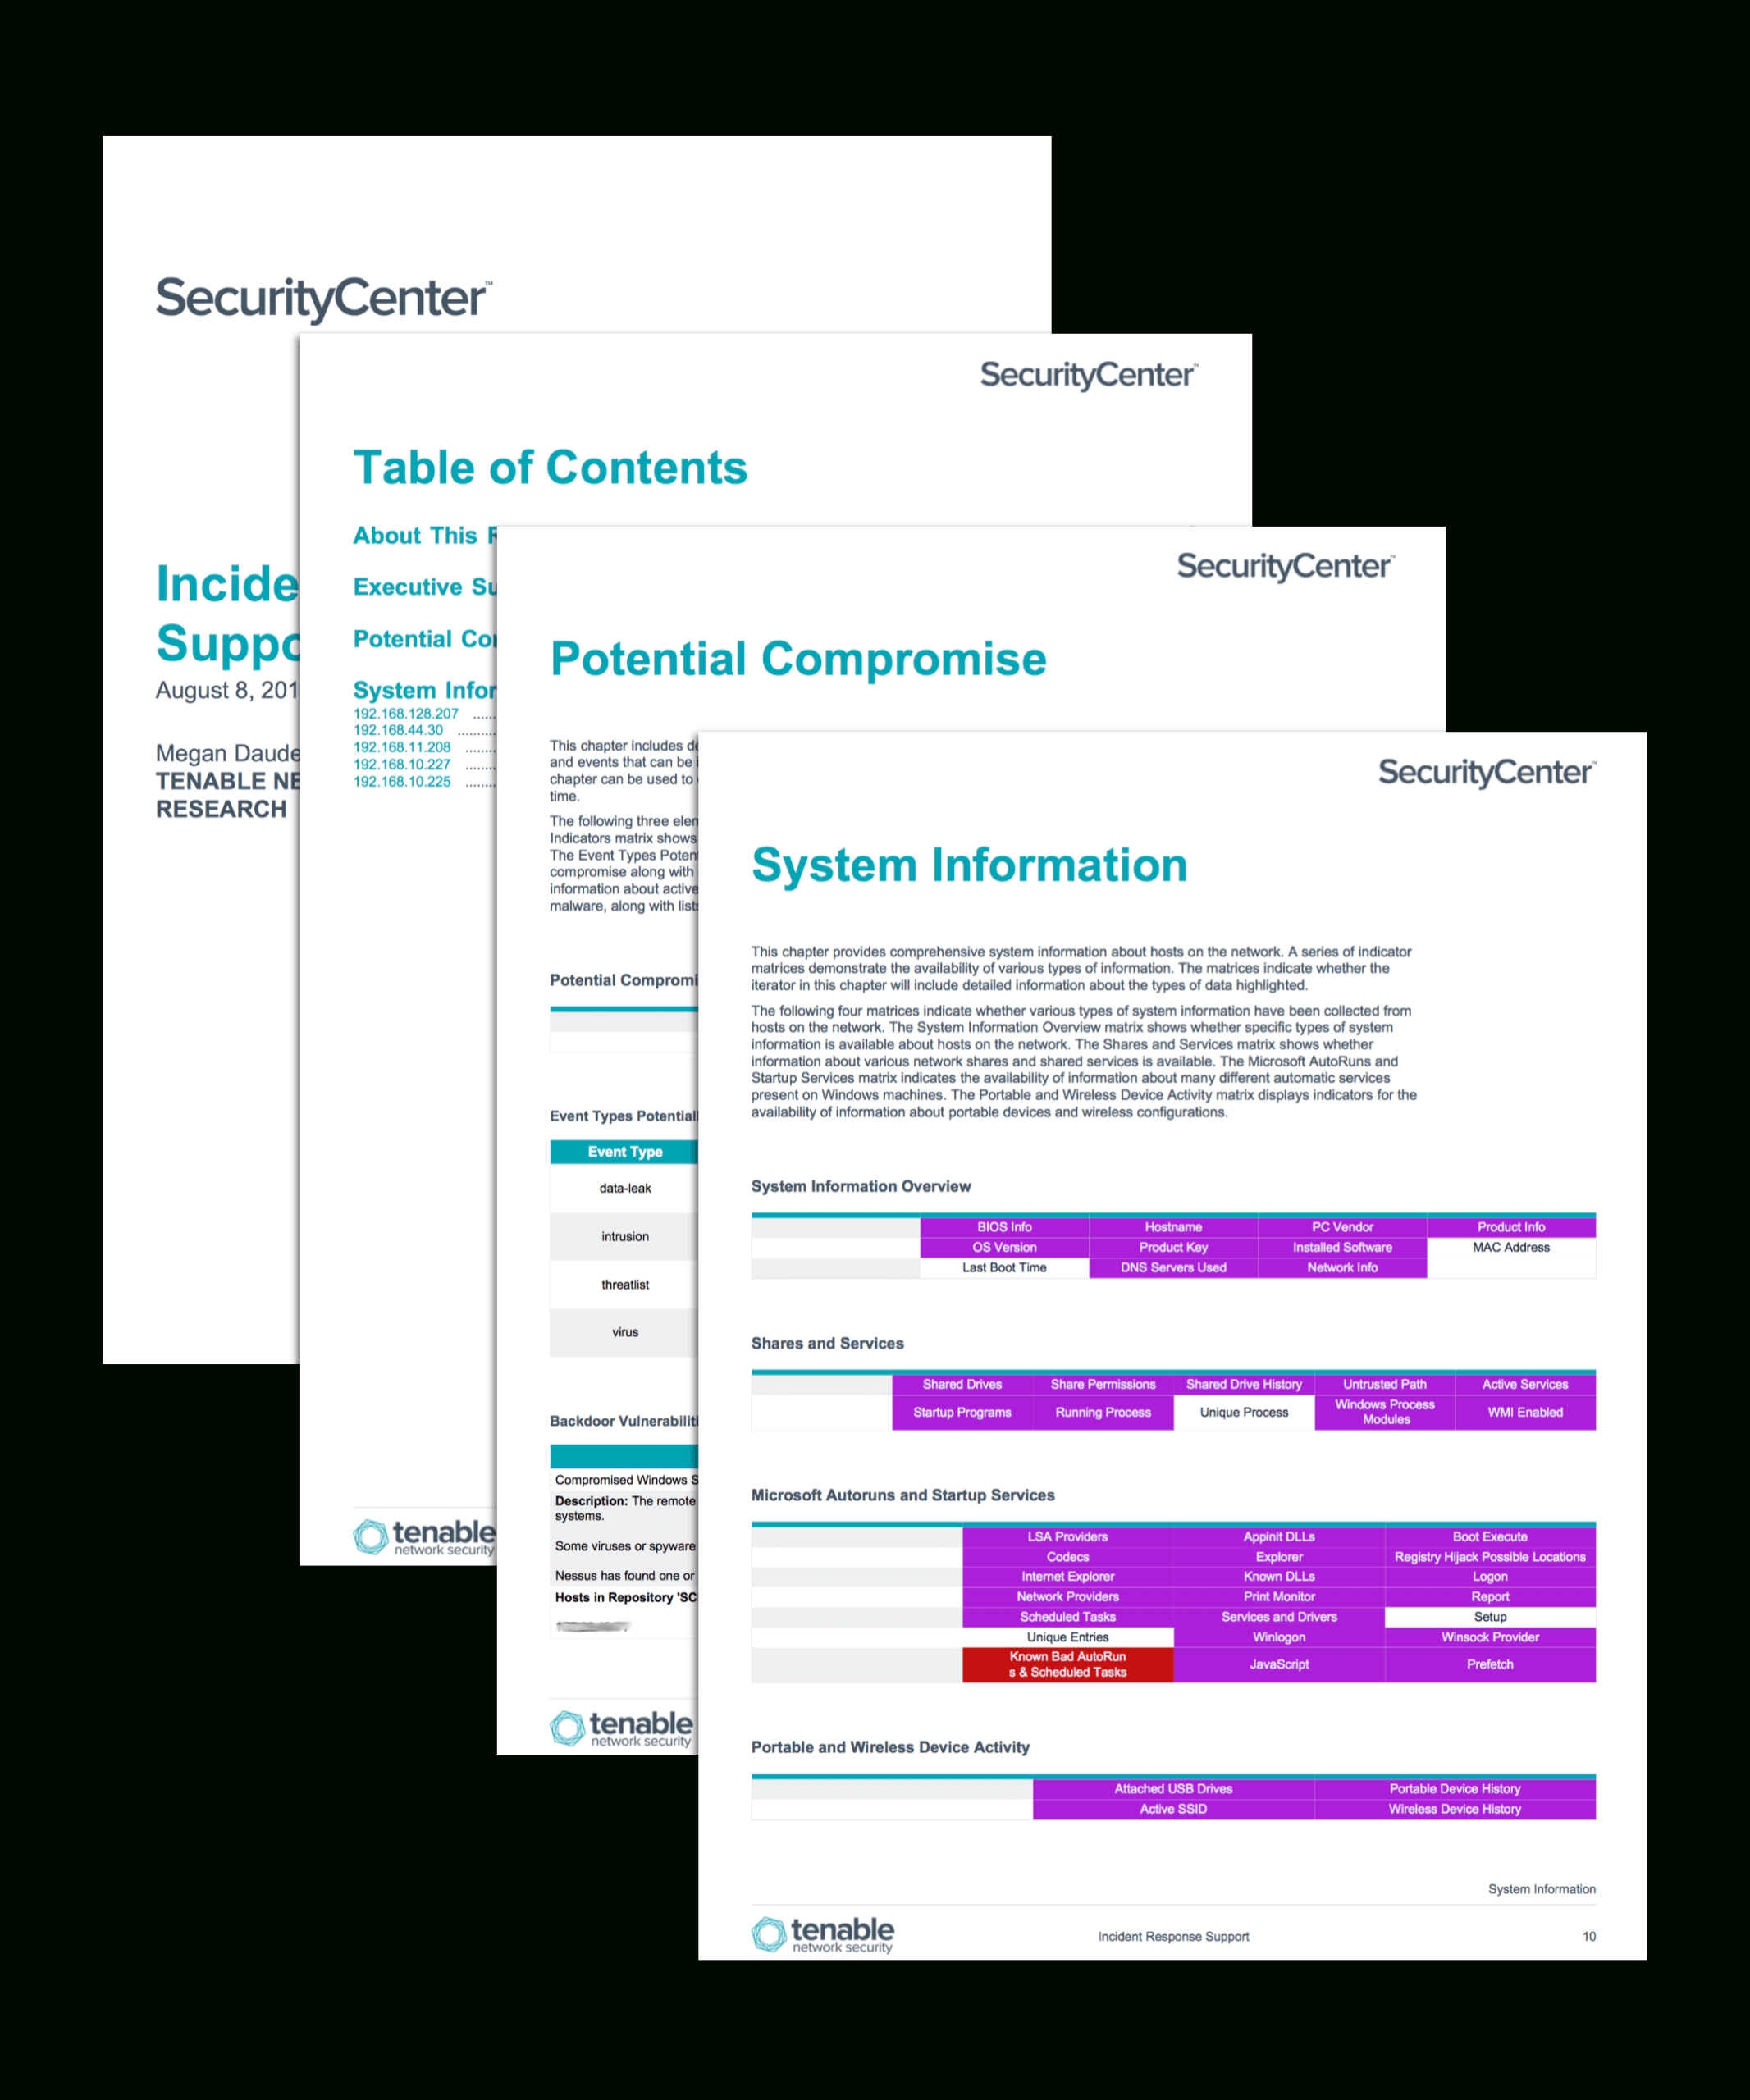 Incident Response Support – Sc Report Template | Tenable® With Regard To Technical Support Report Template